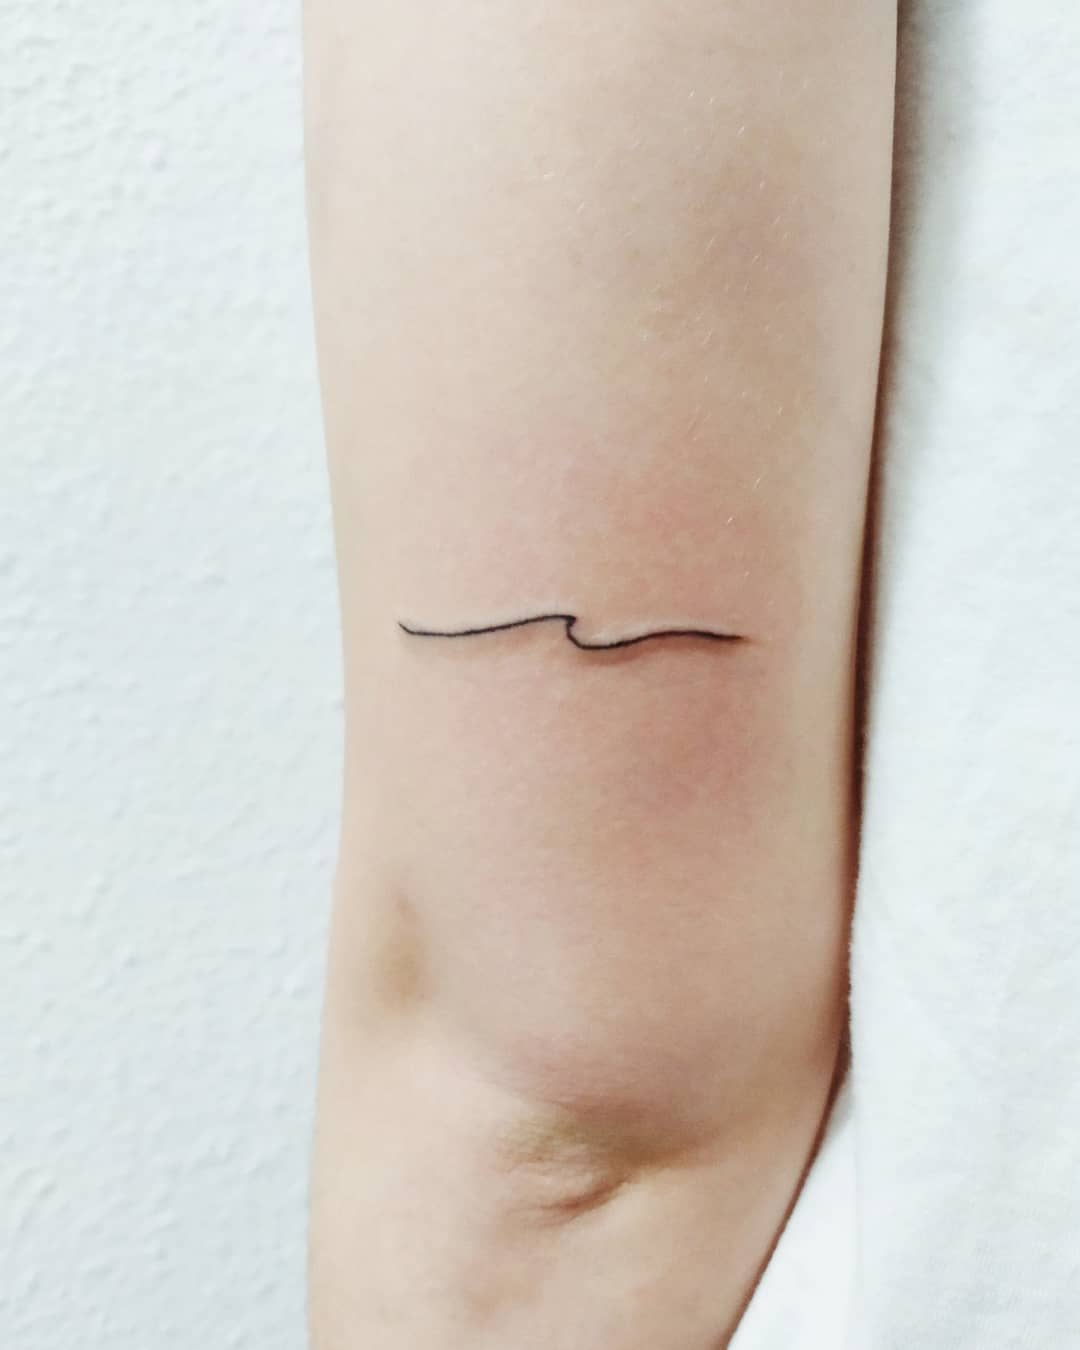 30 Wave Tattoo Design Ideas For Your Inner Coast  100 Tattoos